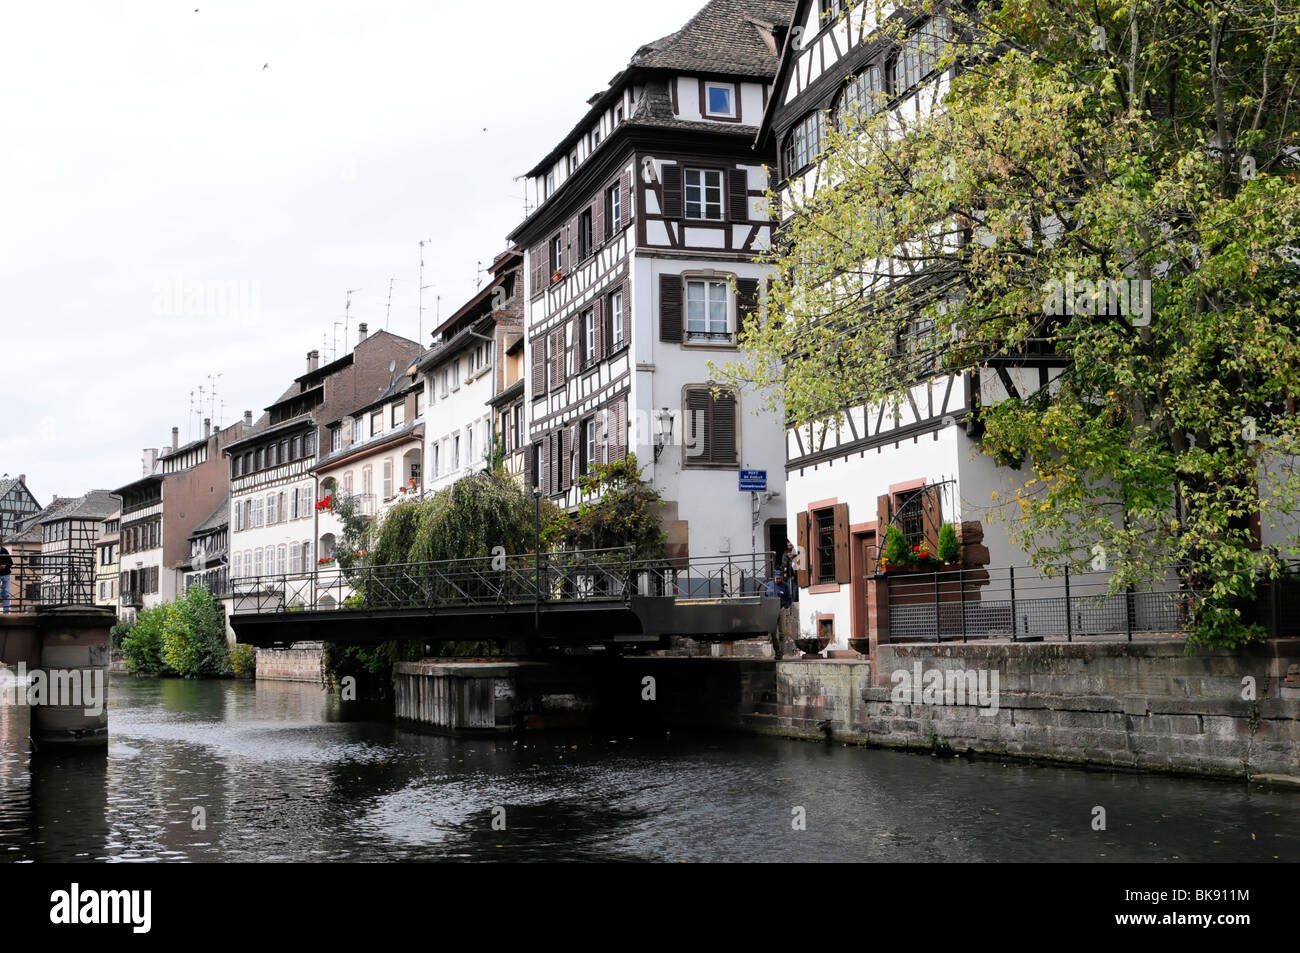 Bridge in the historic town centre, boat ride on the Ill River, Strasbourg, Alsace, France, Europe Stock Photo